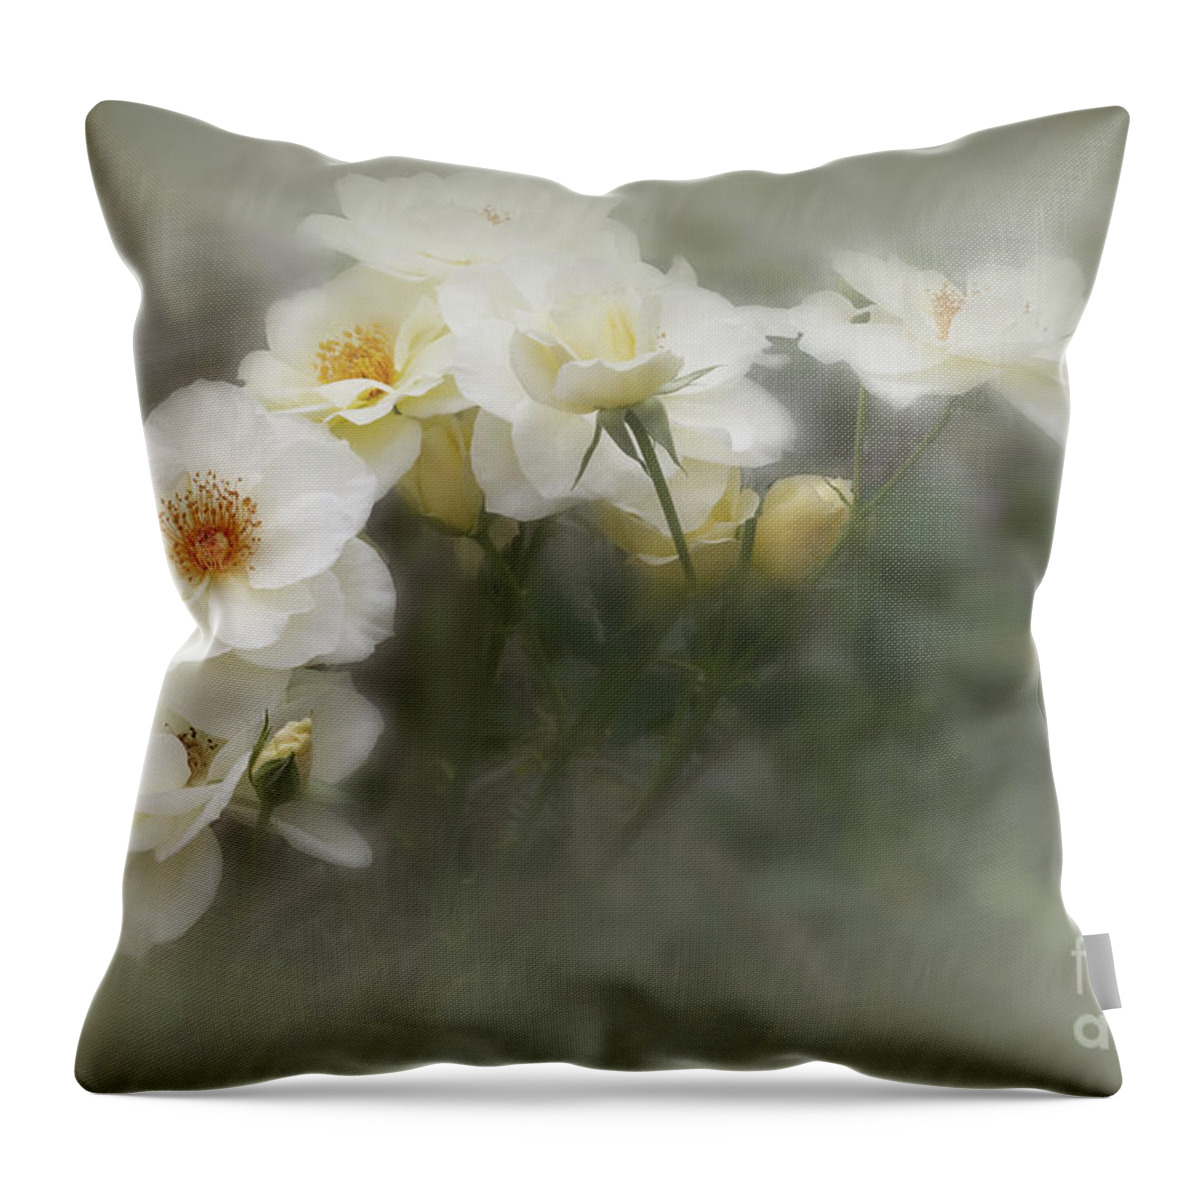 Roses Throw Pillow featuring the photograph White Roses 2 by Elaine Teague